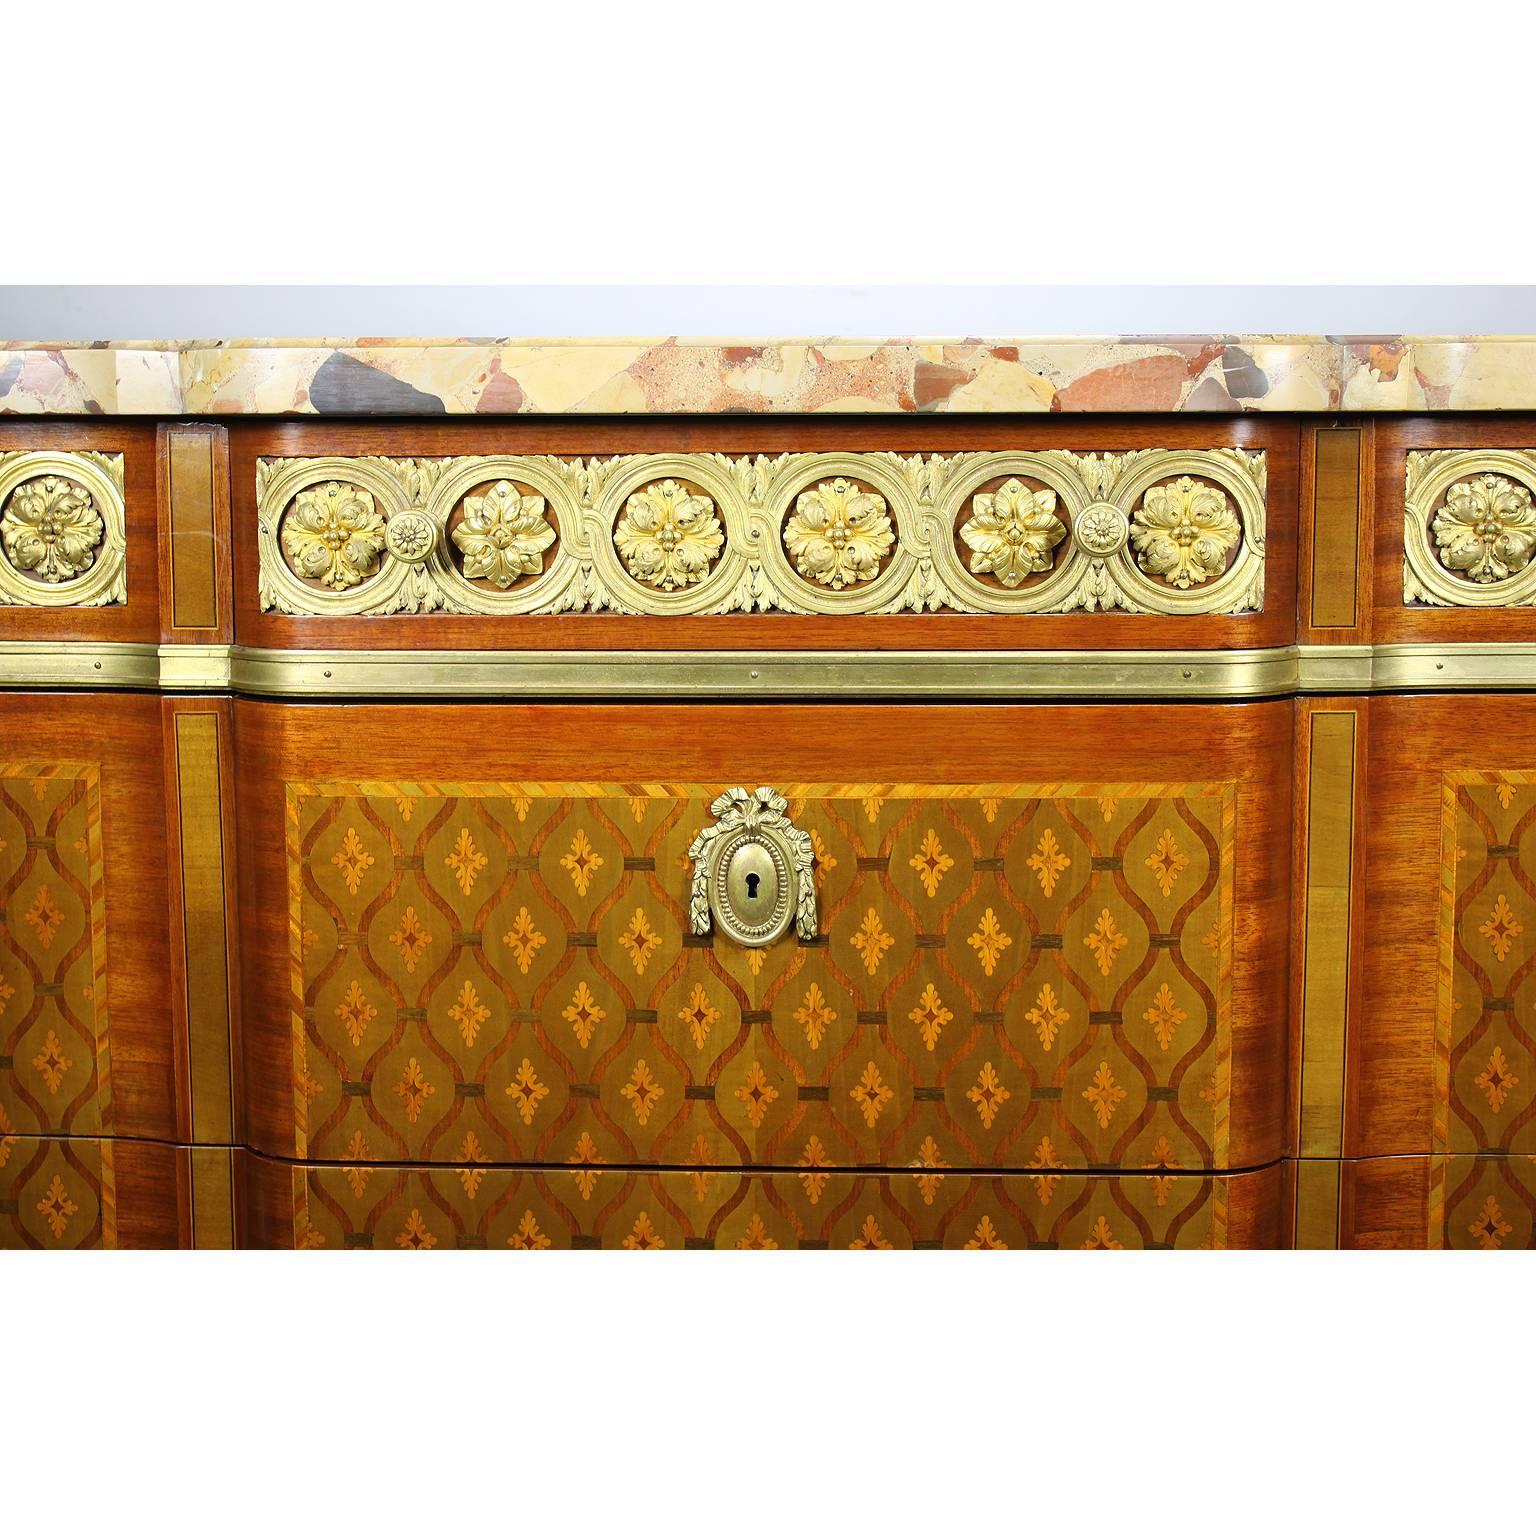 Gilt French 19th Century Finely Chased Ormolu Mounted Regence Style Marquetry Commode For Sale